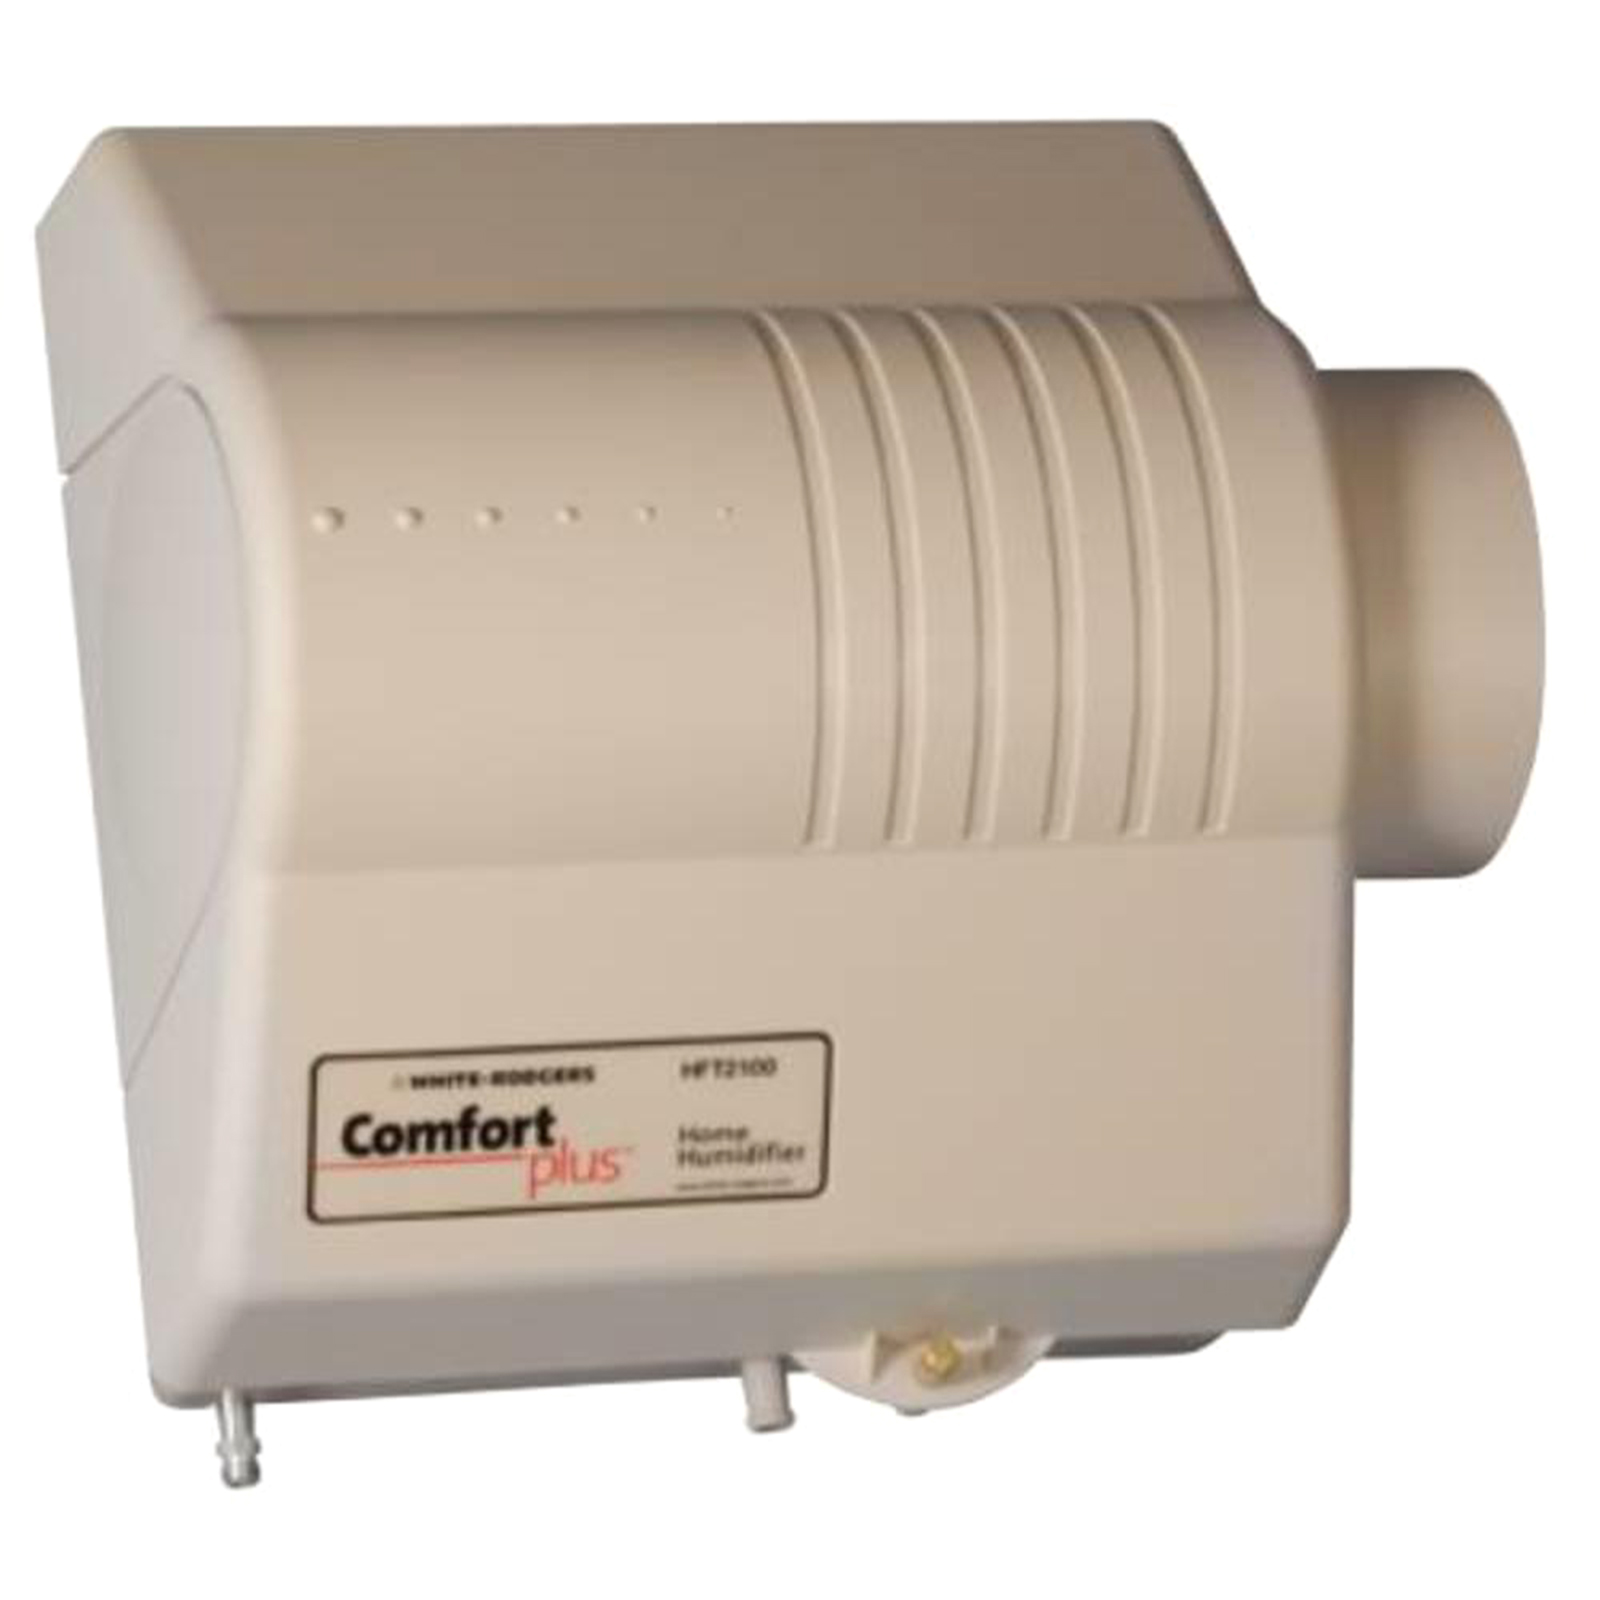 White Rodgers HFT2100 14gal Duct Humidifier